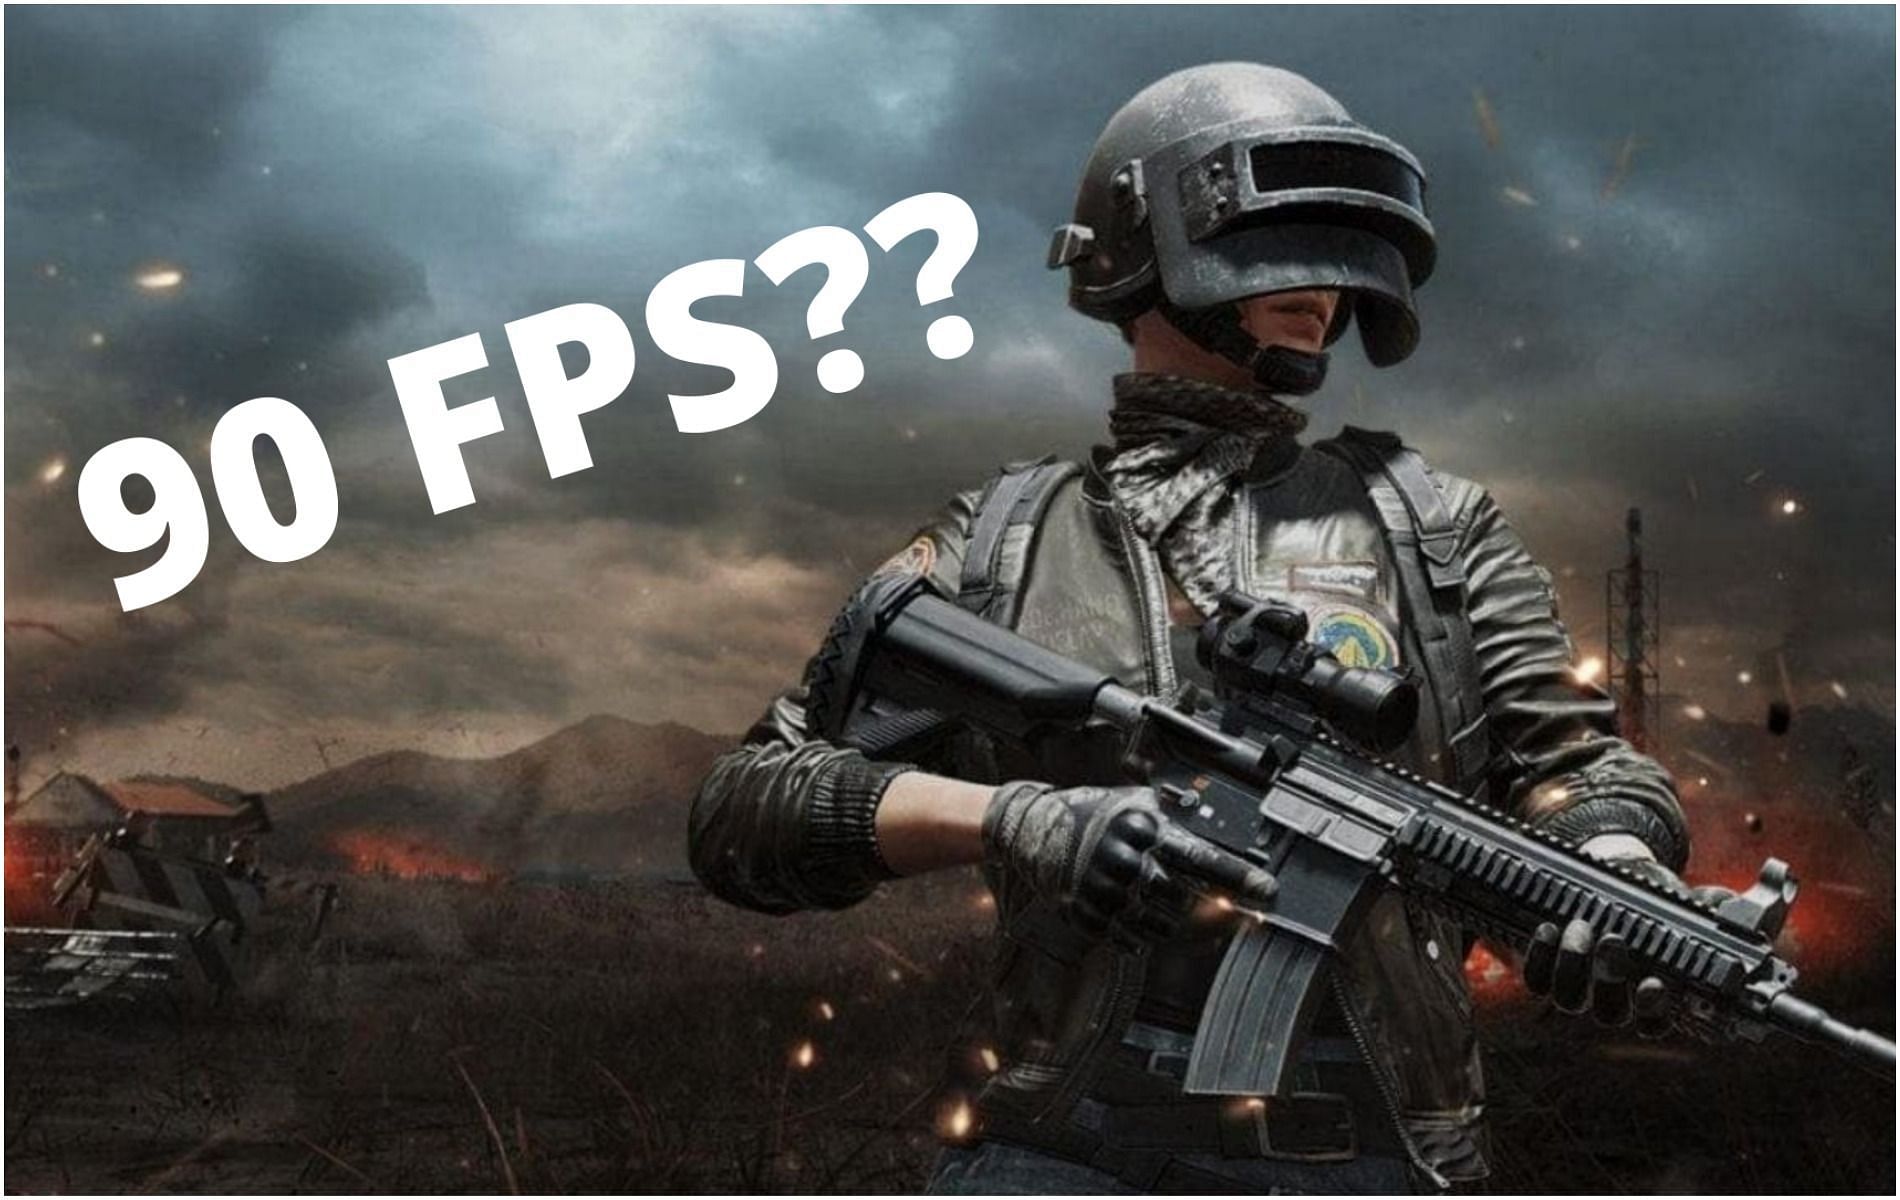 Which are the best Android devices to play PUBG Mobile on 90 FPS? (Image via Sportskeeda)